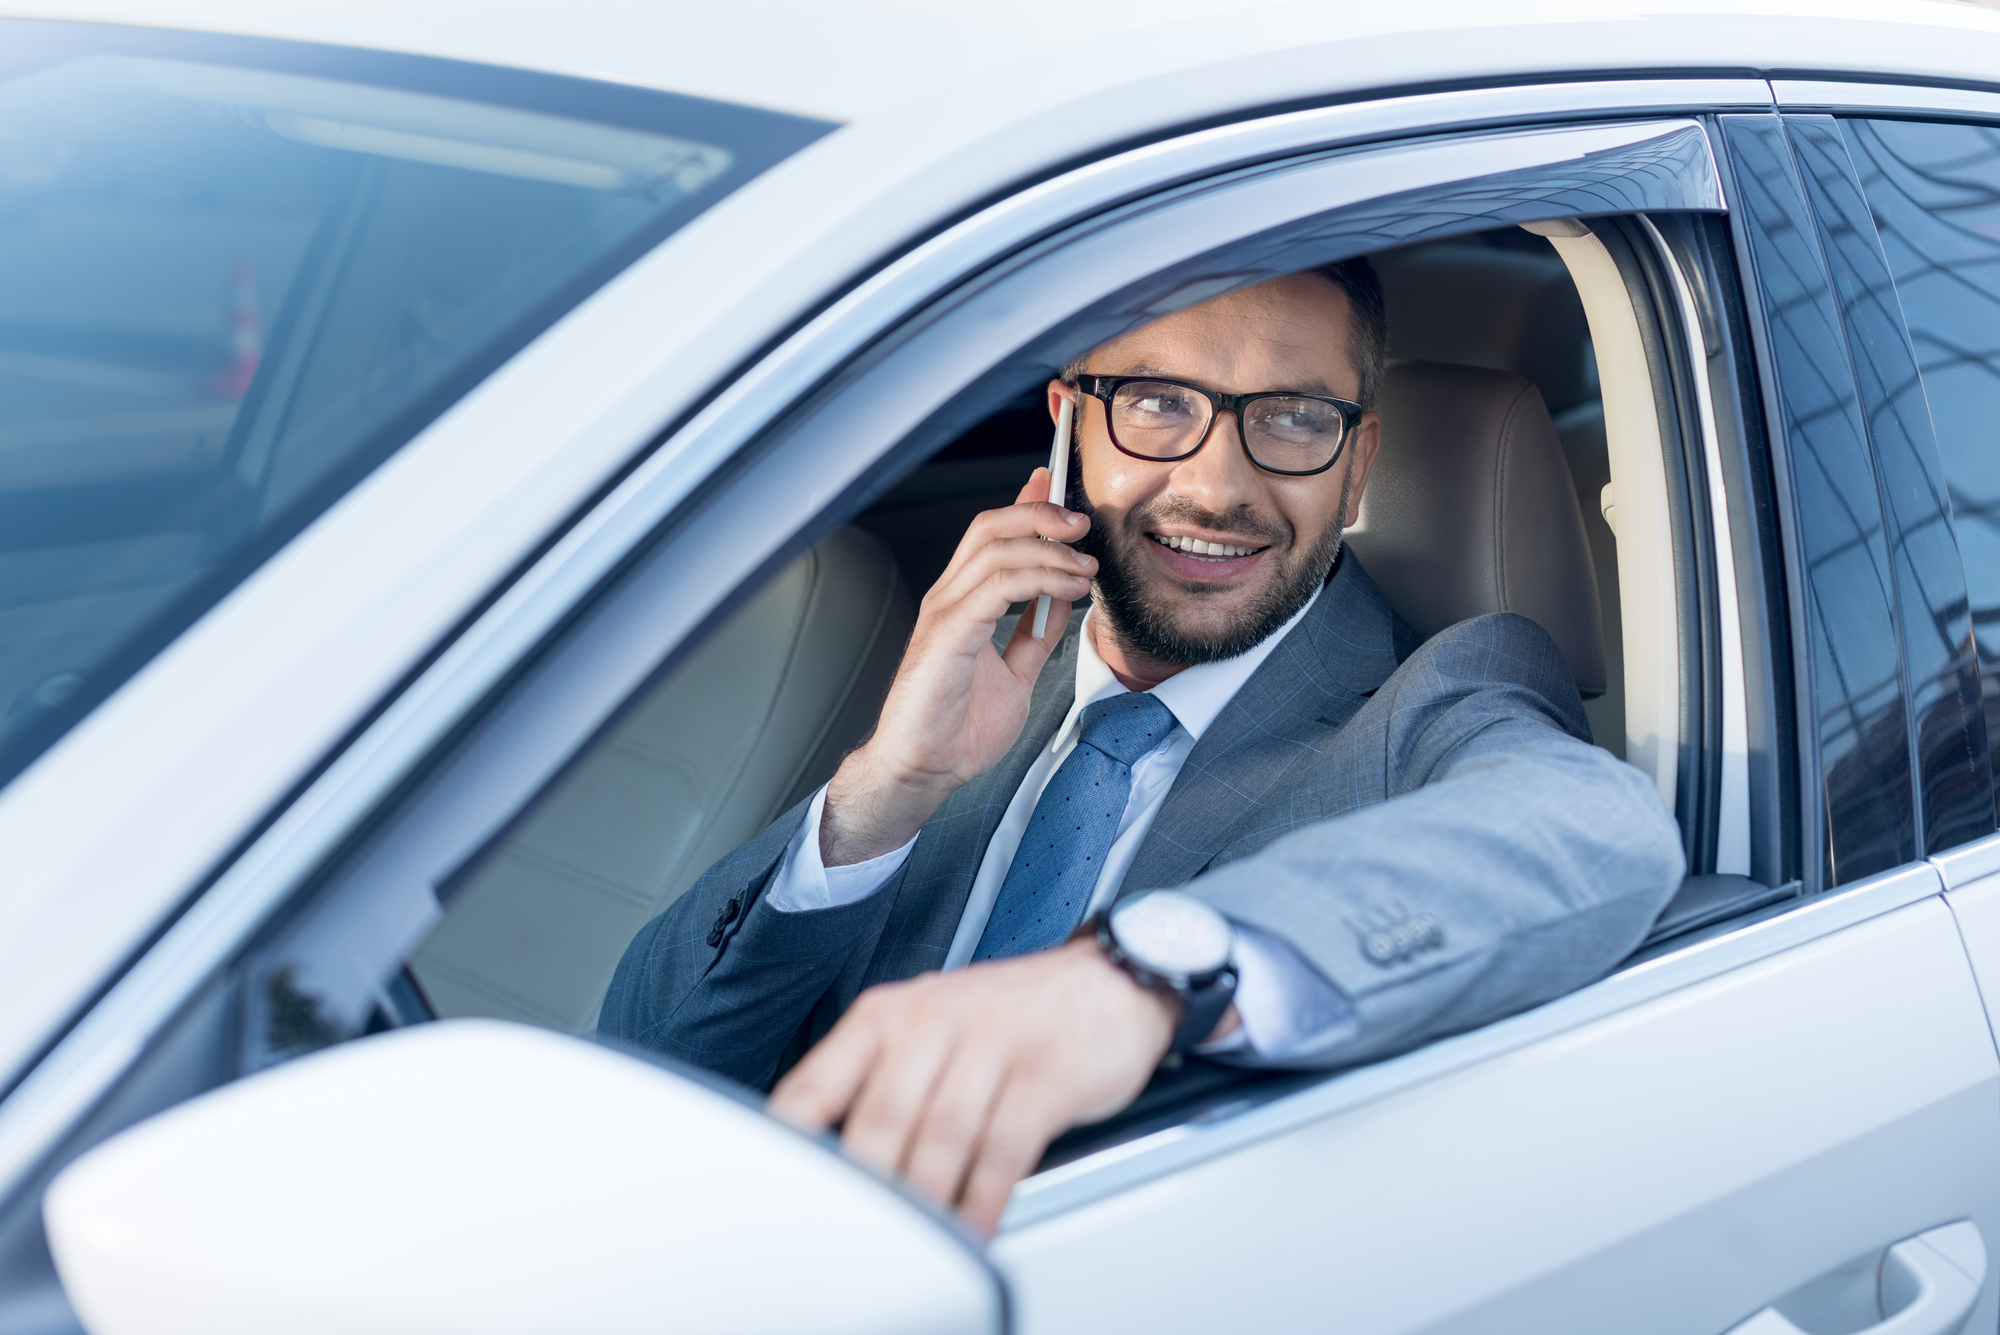 A man in business attire sits in his car with the window rolled down looking outward as he speaks to someone on his phone smiling